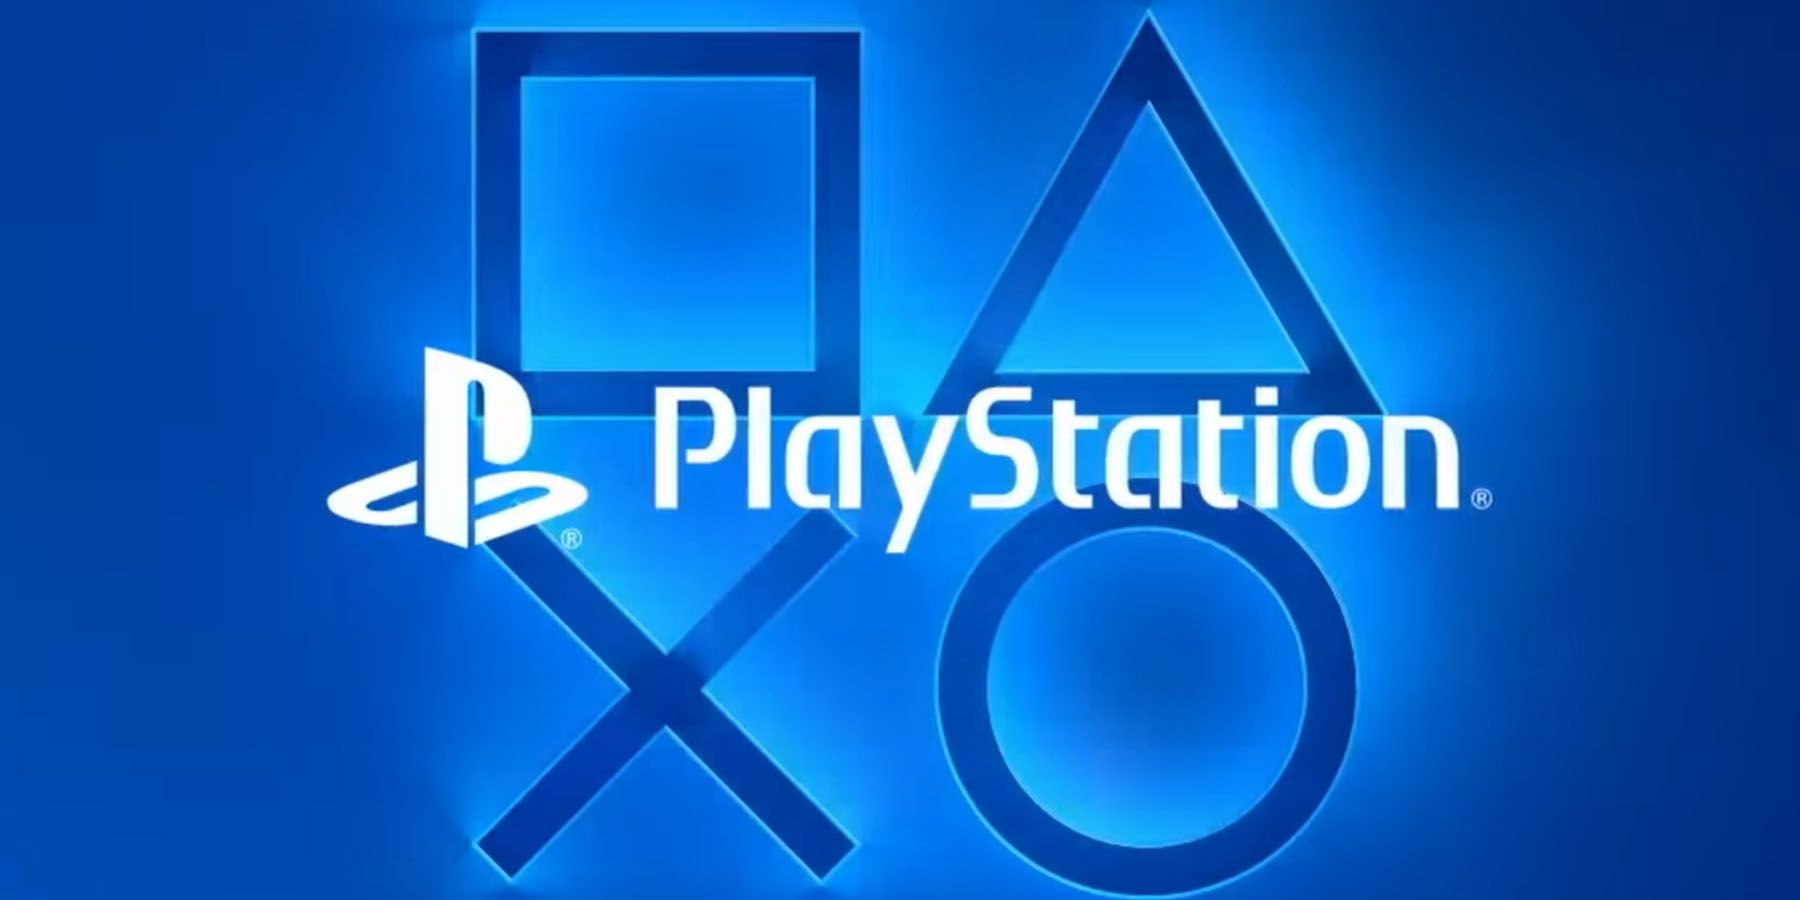 A white PlayStation logo and text in front of the four button symbols against a blue background.